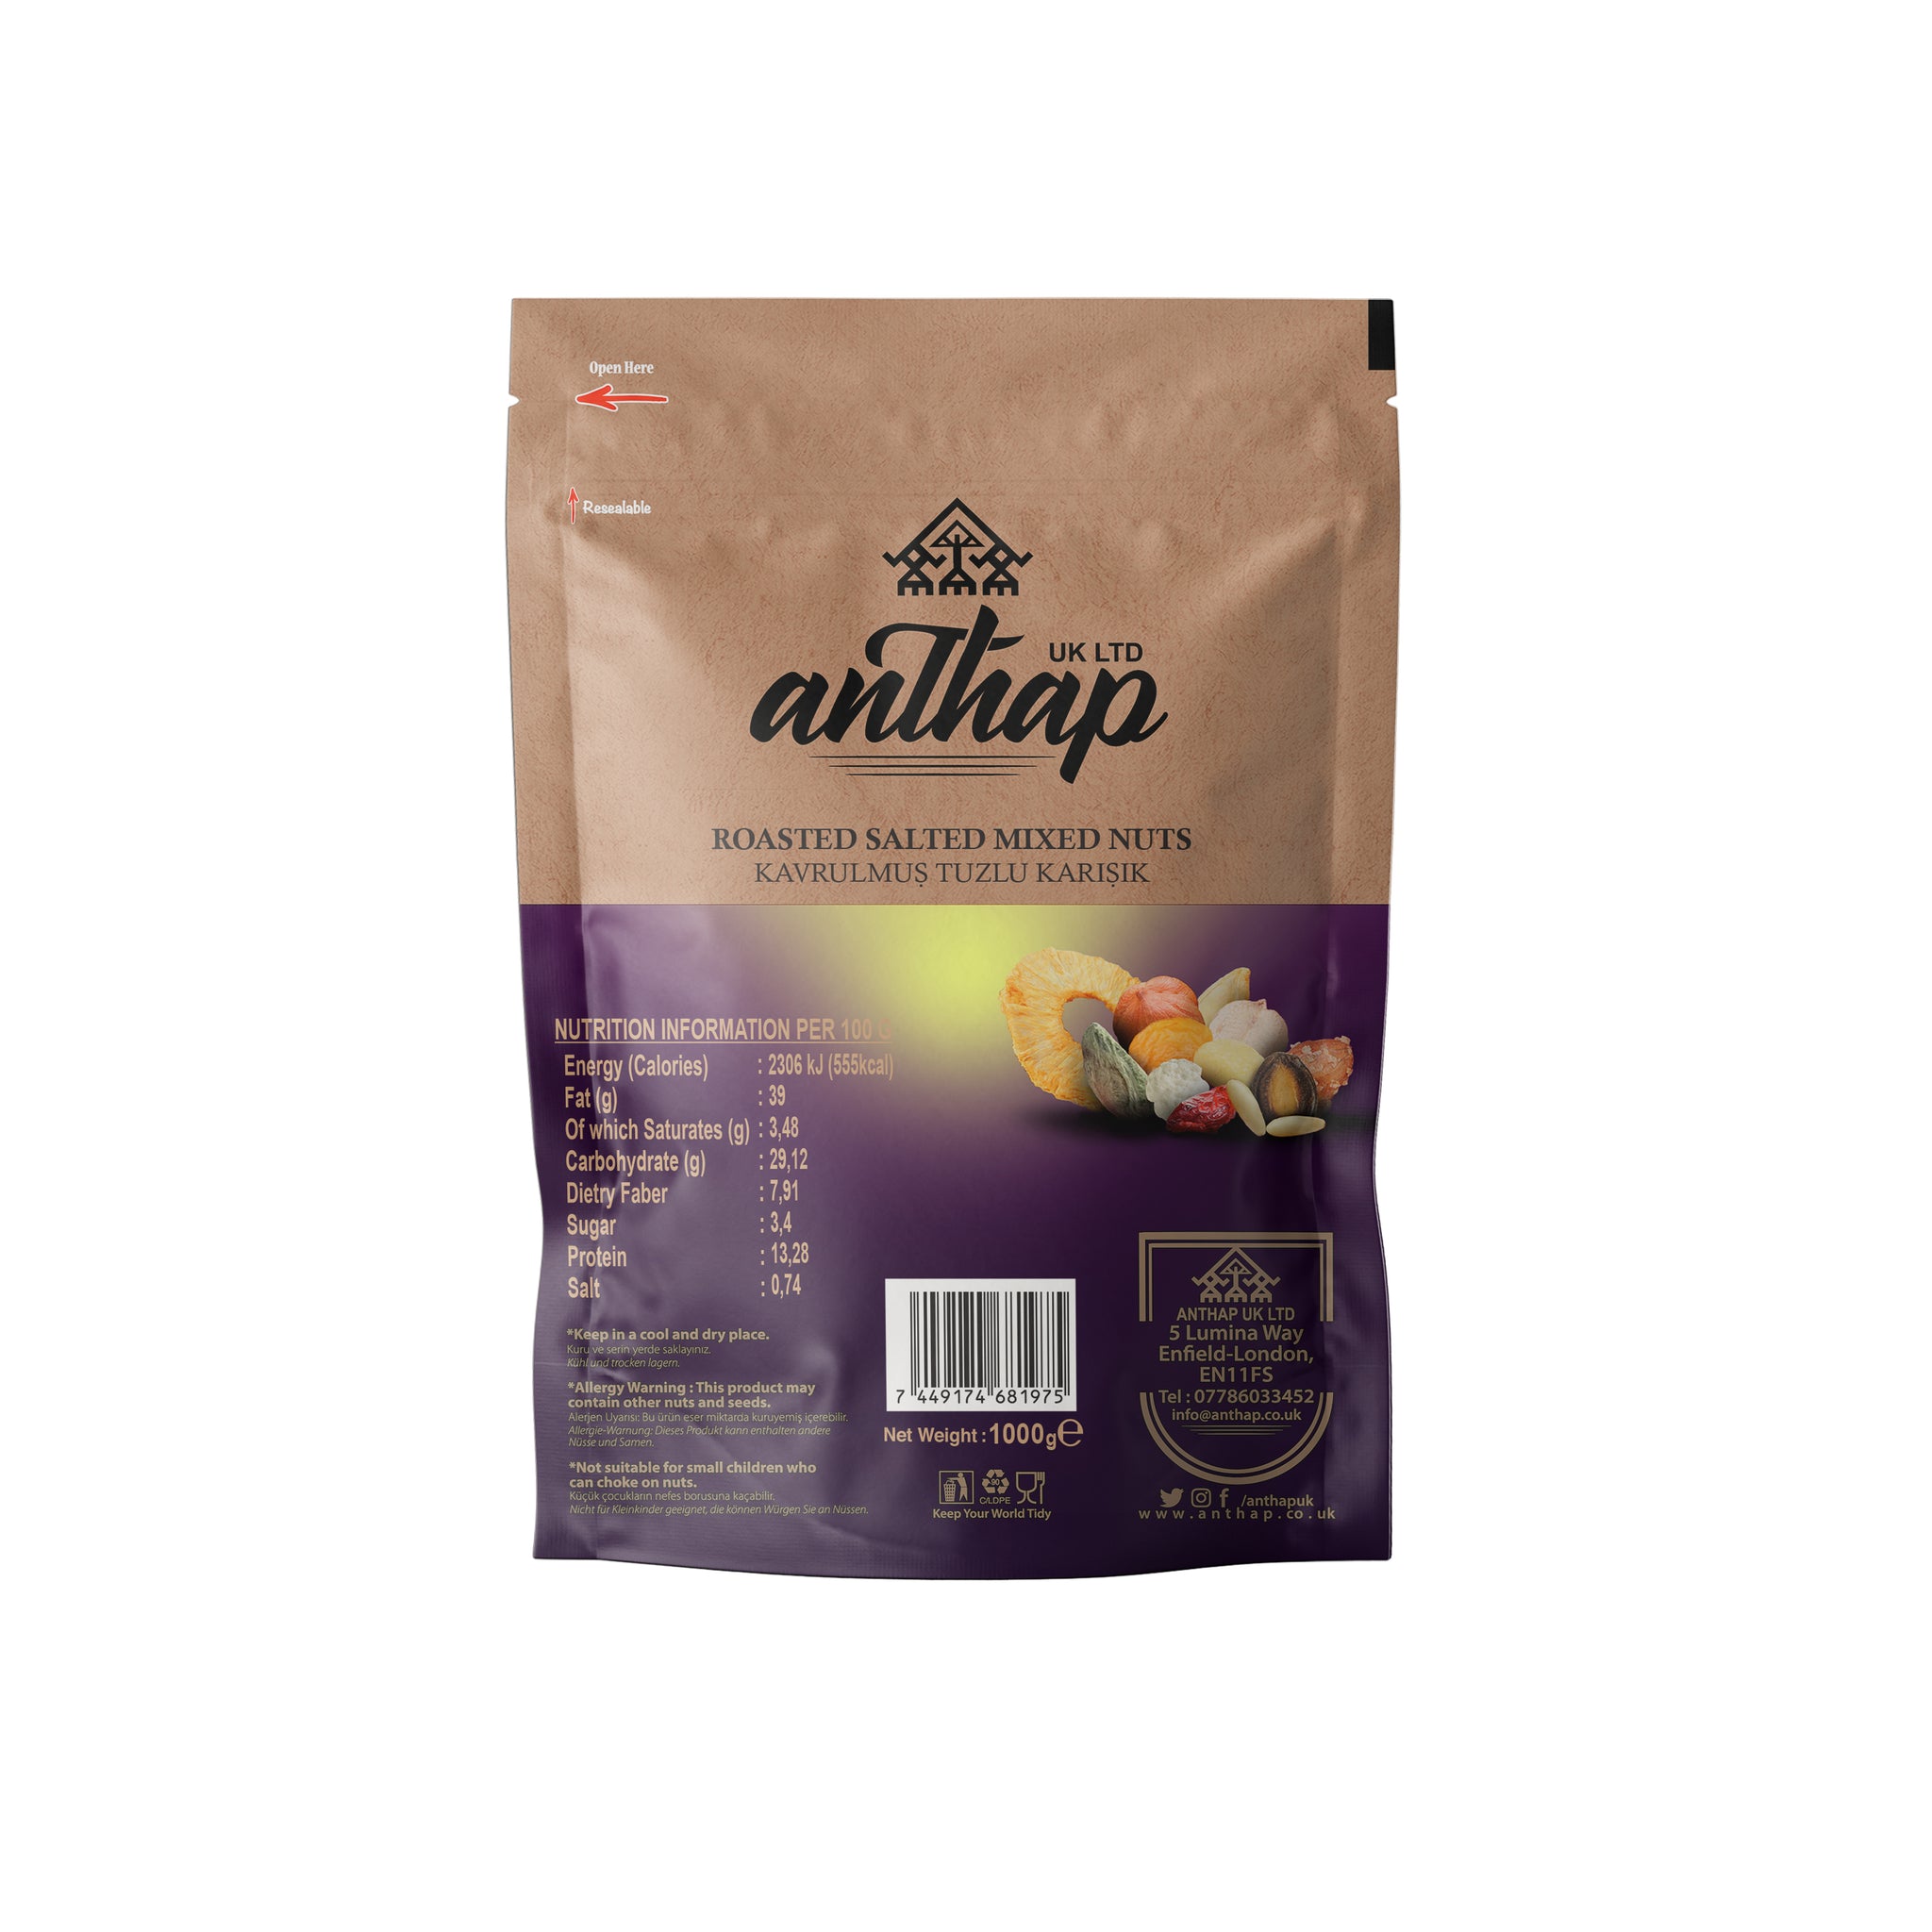 Anthap Roasted Salted Ultra LUX Mix